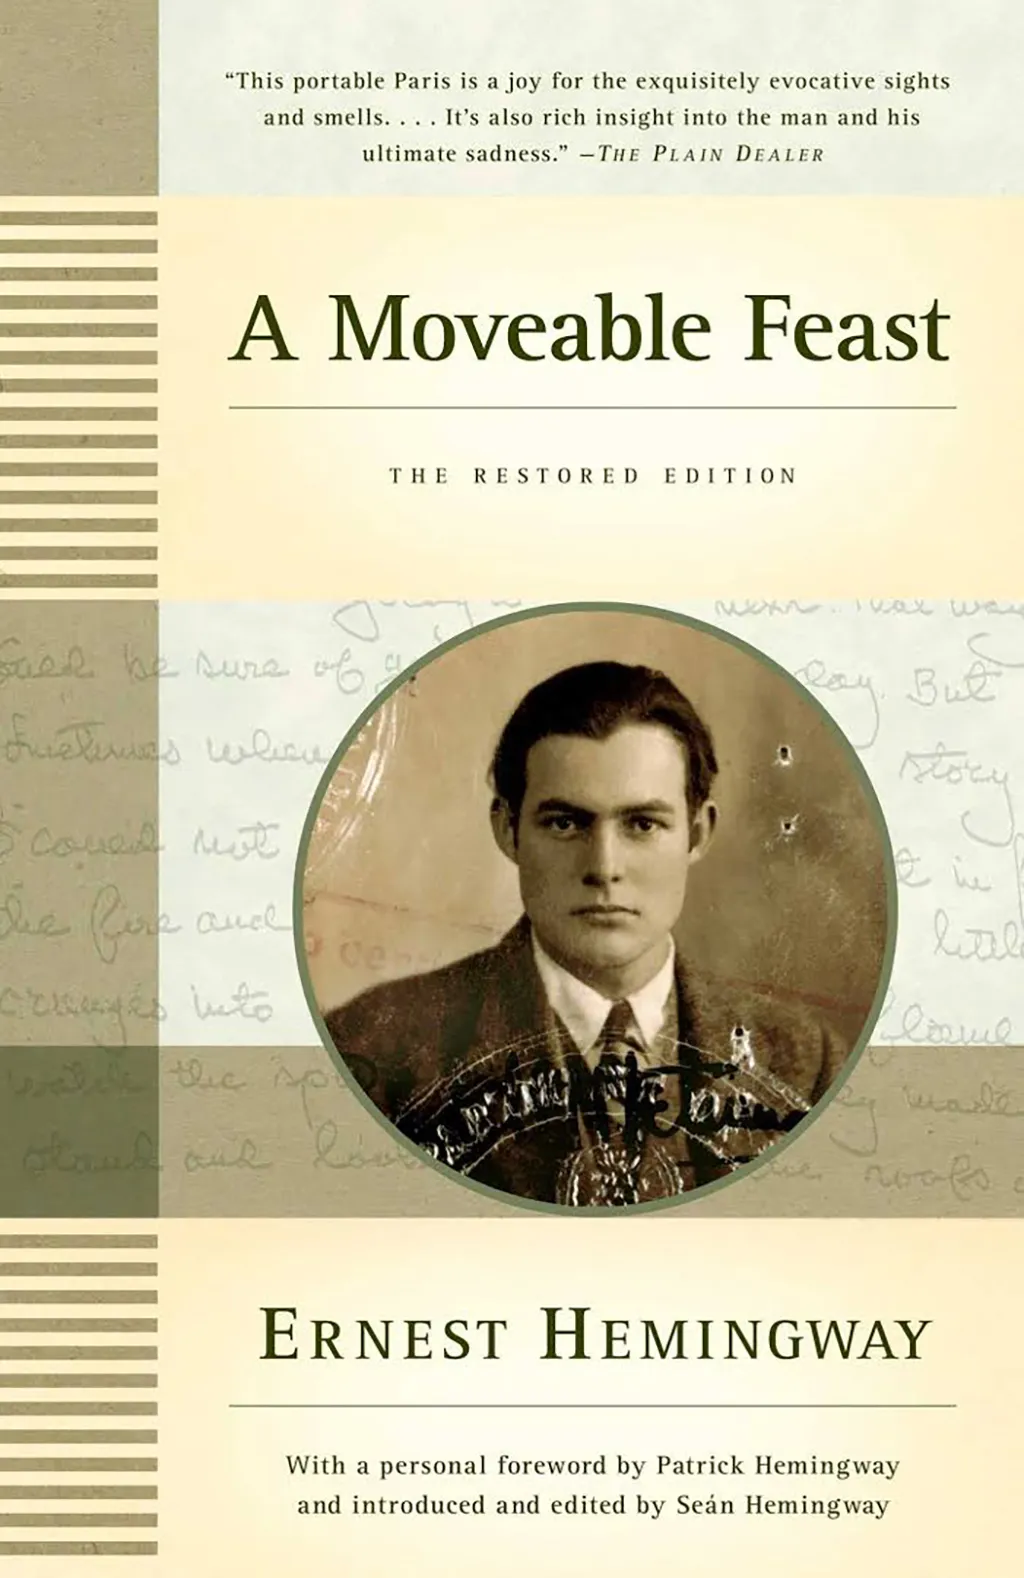 a moveable feast, books every man should read